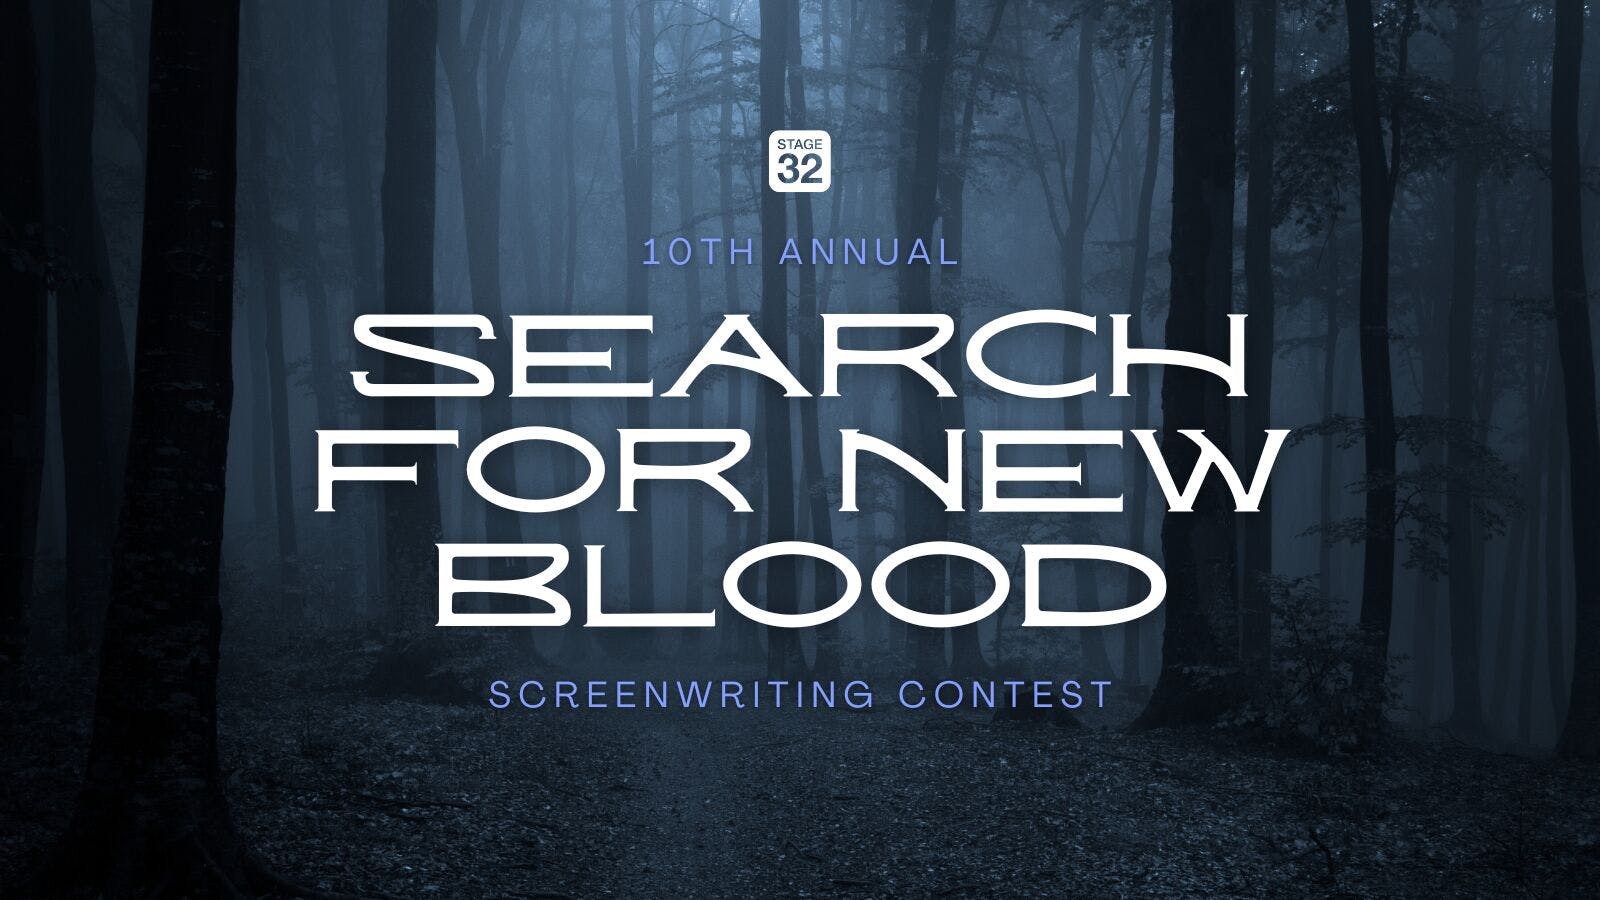 Announcing the 10th Annual Search for New Blood Screenwriting Contest